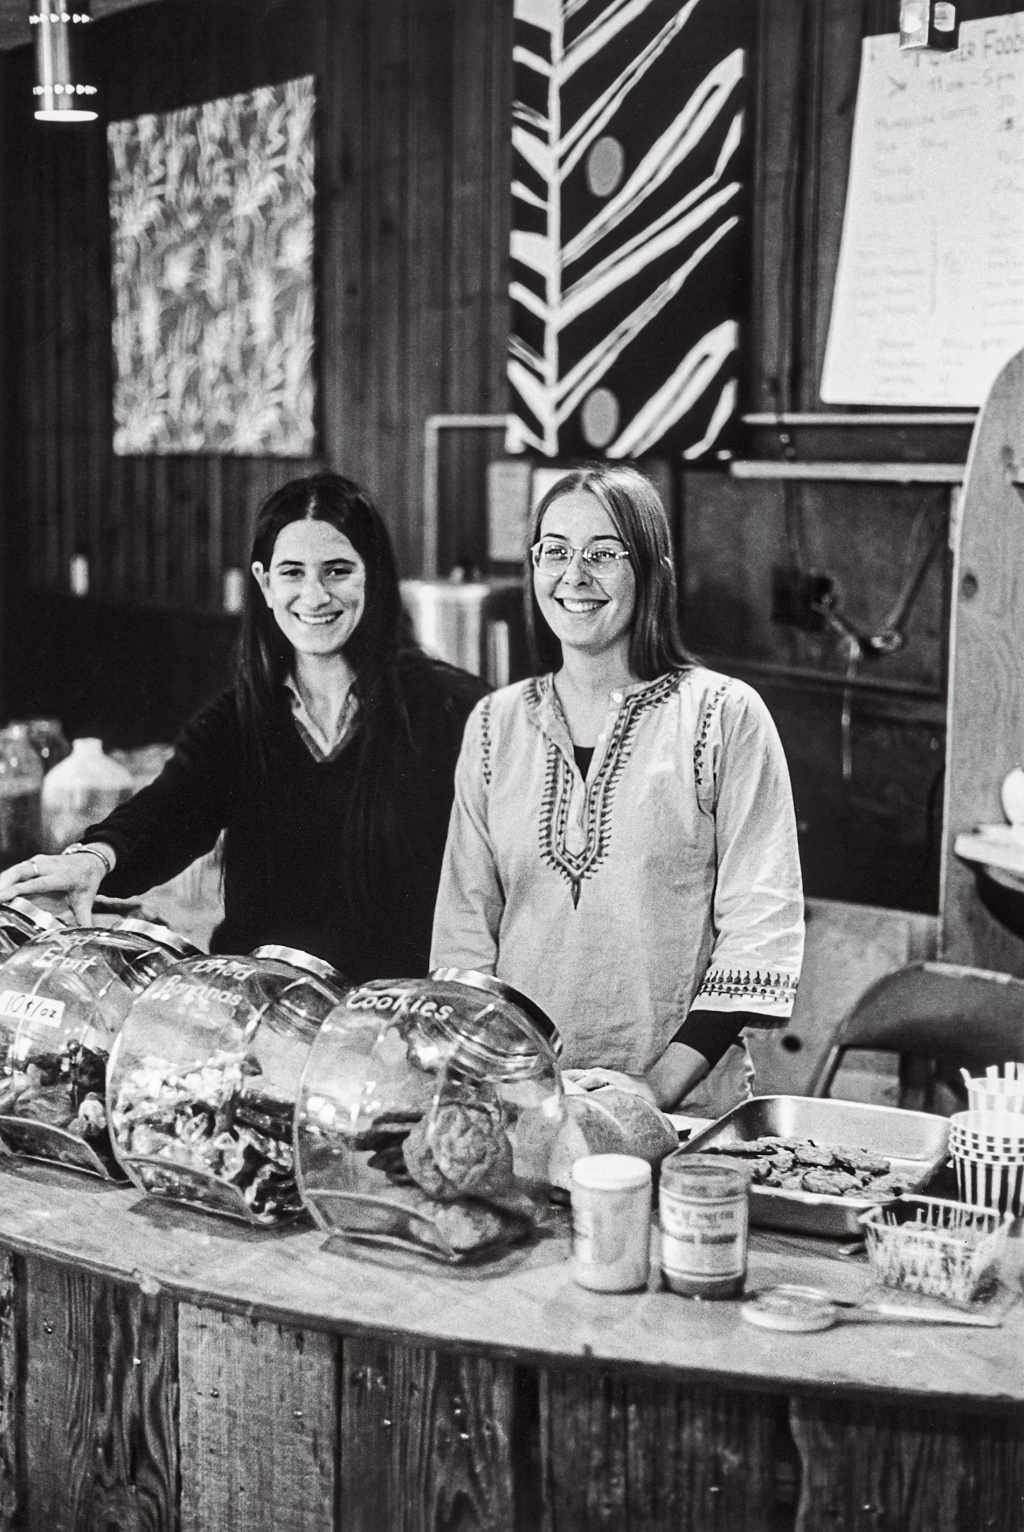 Image of Leslie Seeman and Barb Goldman standing behind the counter in the 1970's Brown University coffeeshop "Big Mother"